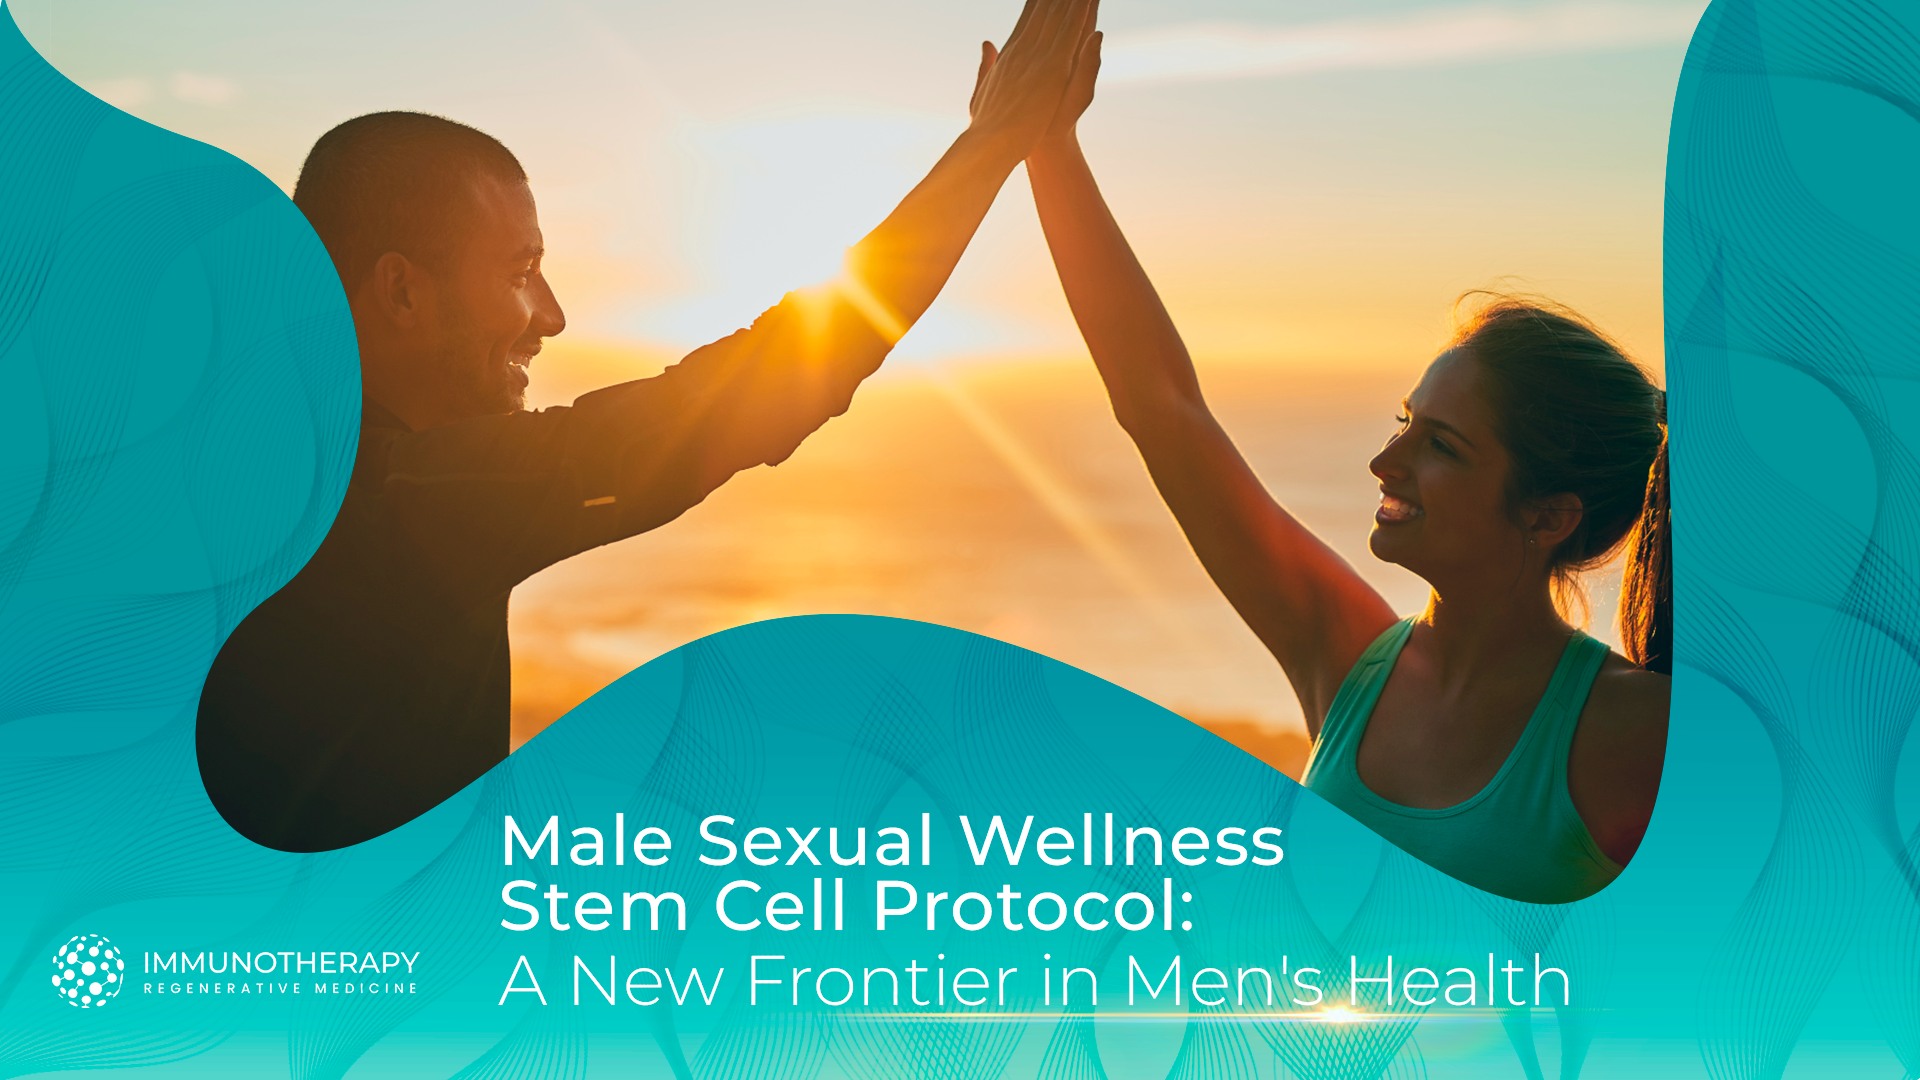 Male Sexual Wellness Stem Cell Protocol A New Frontier in Men's Health